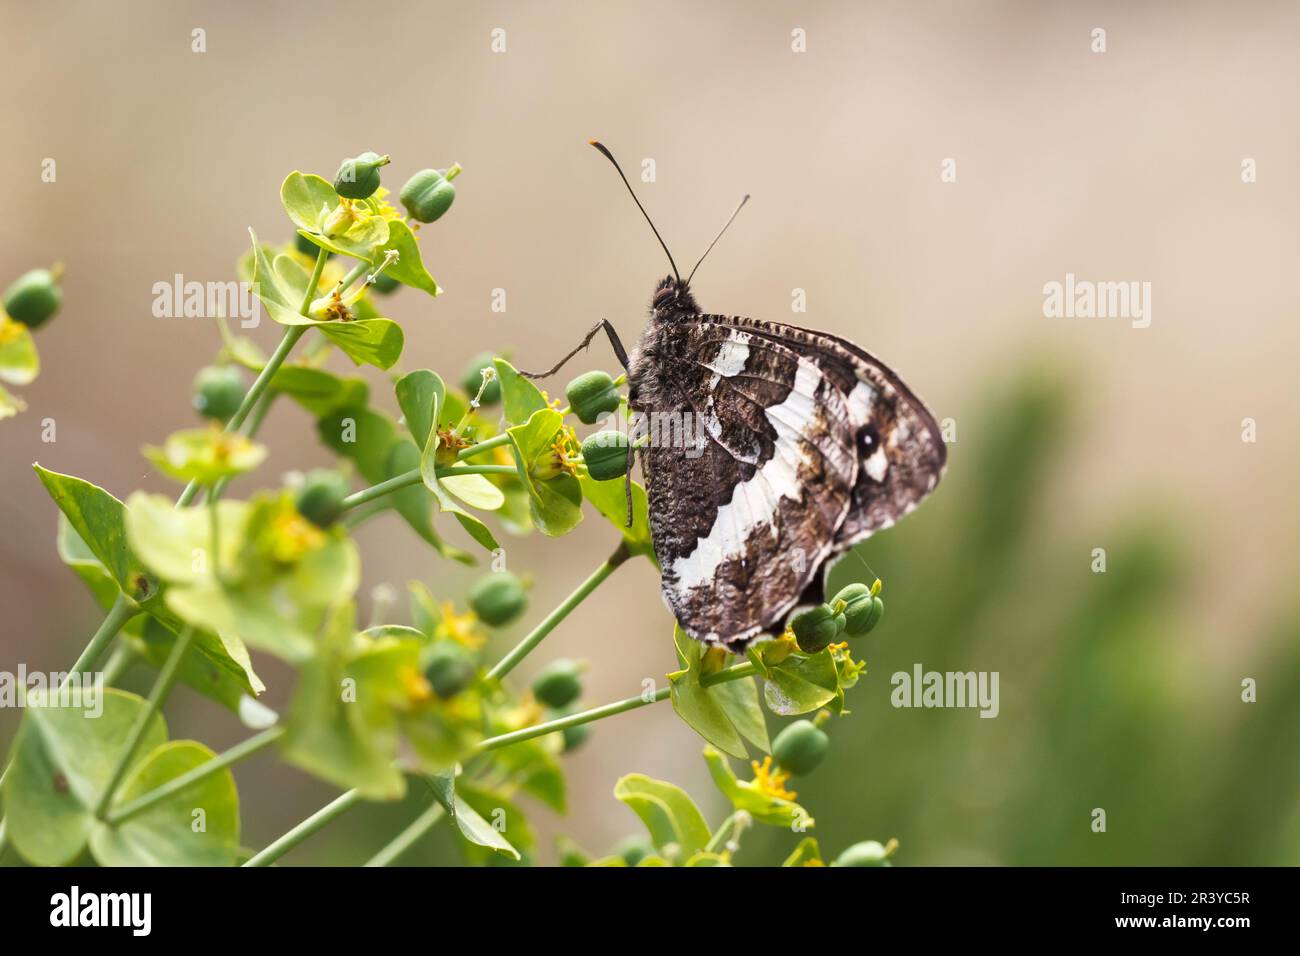 Brintesia circe (syn. Aulocera circe), known as Great banded grayling Stock Photo